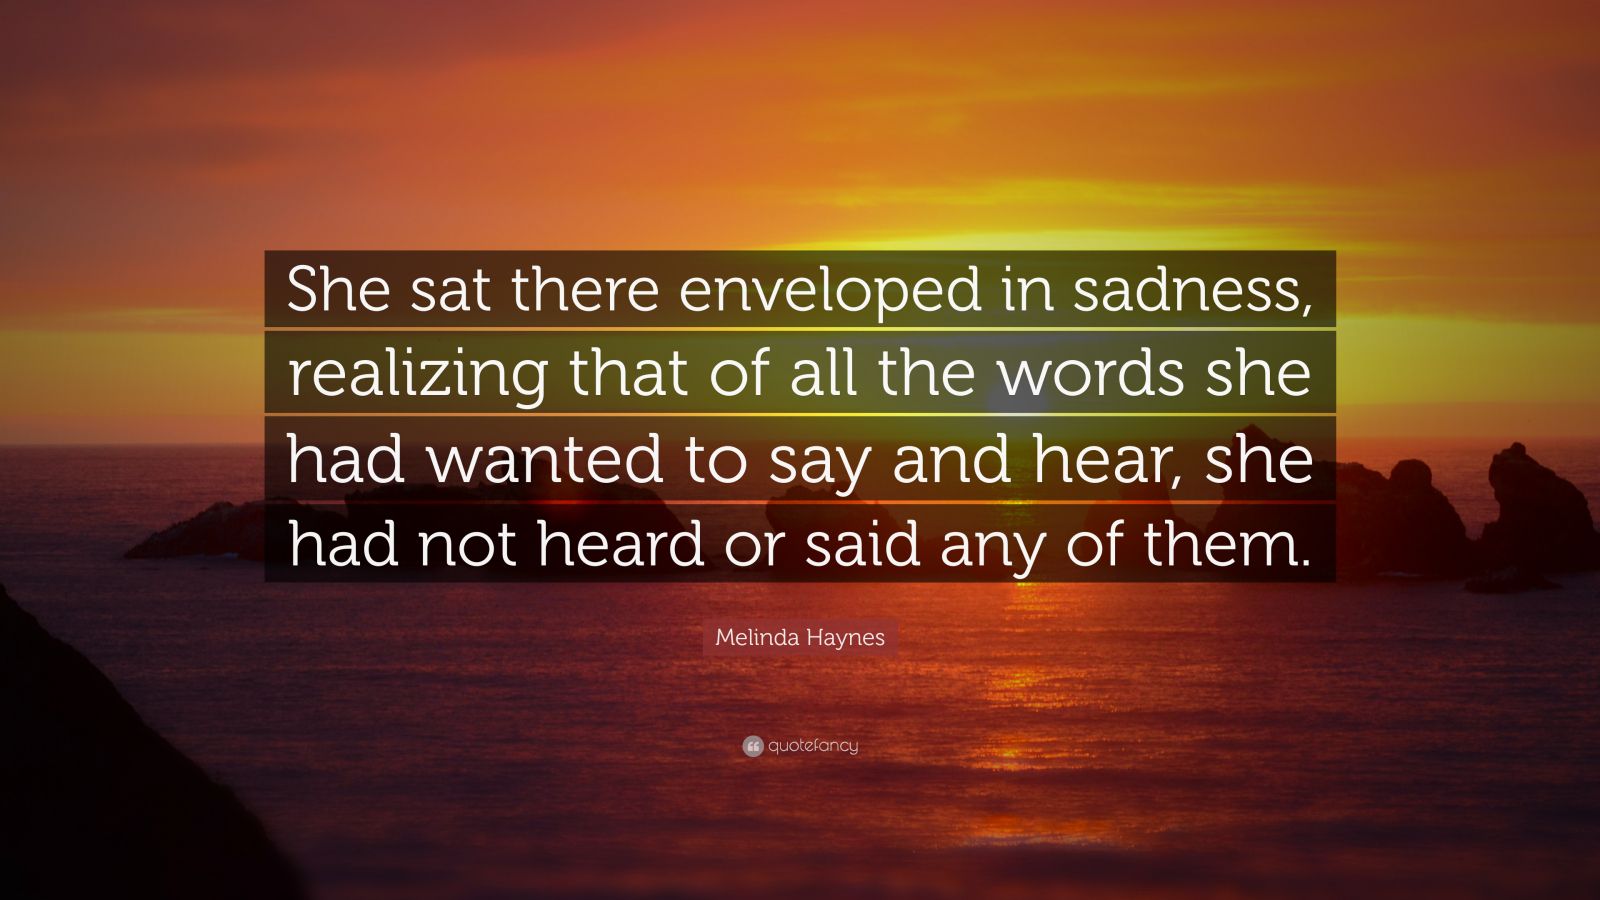 Melinda Haynes Quote: “She sat there enveloped in sadness, realizing ...